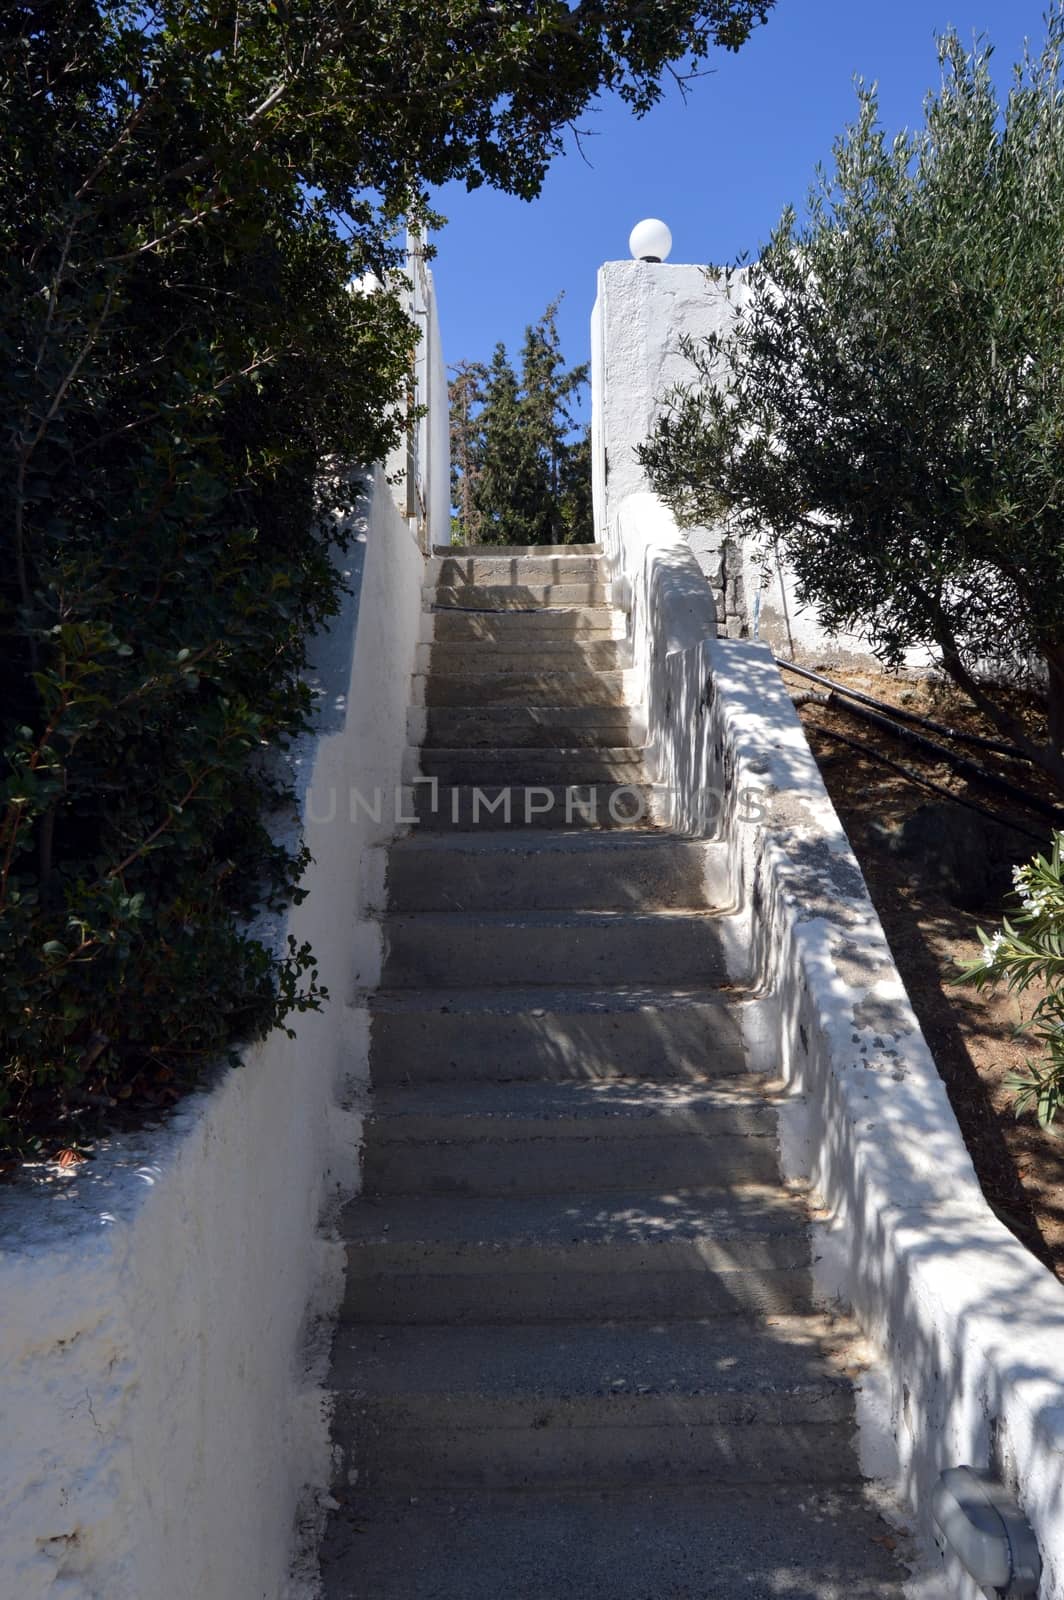 One staircases of concrete decorated with two walls white.